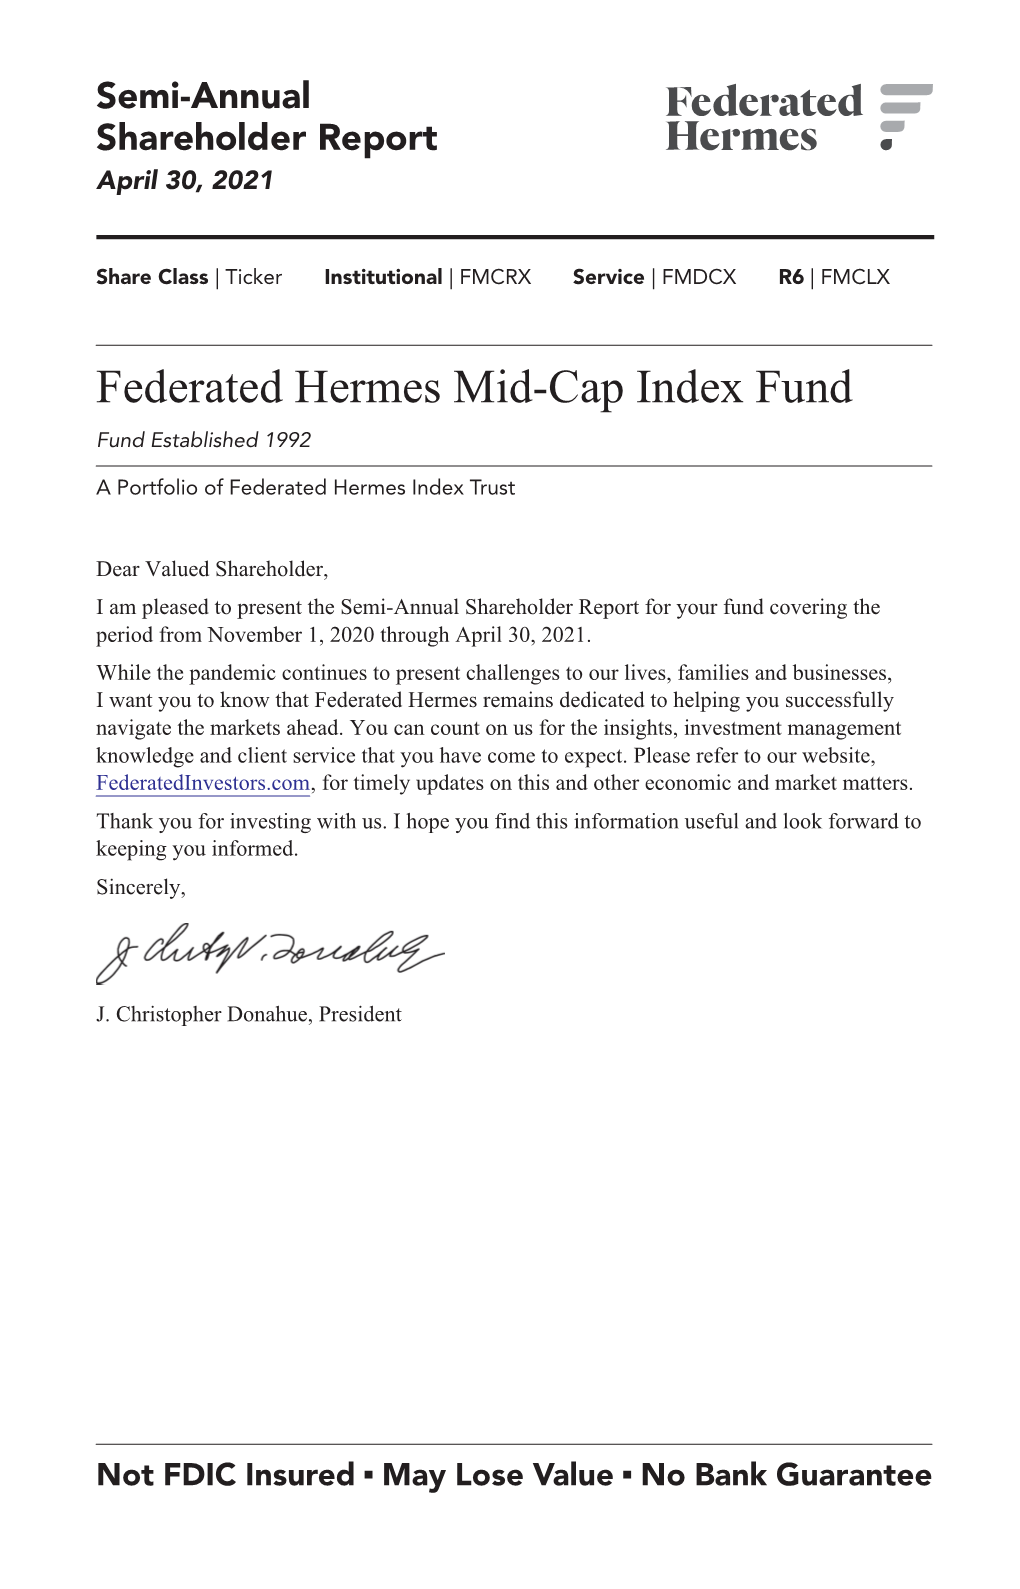 Mid-Cap Index Fund (IS, SS, and R6 Shares)